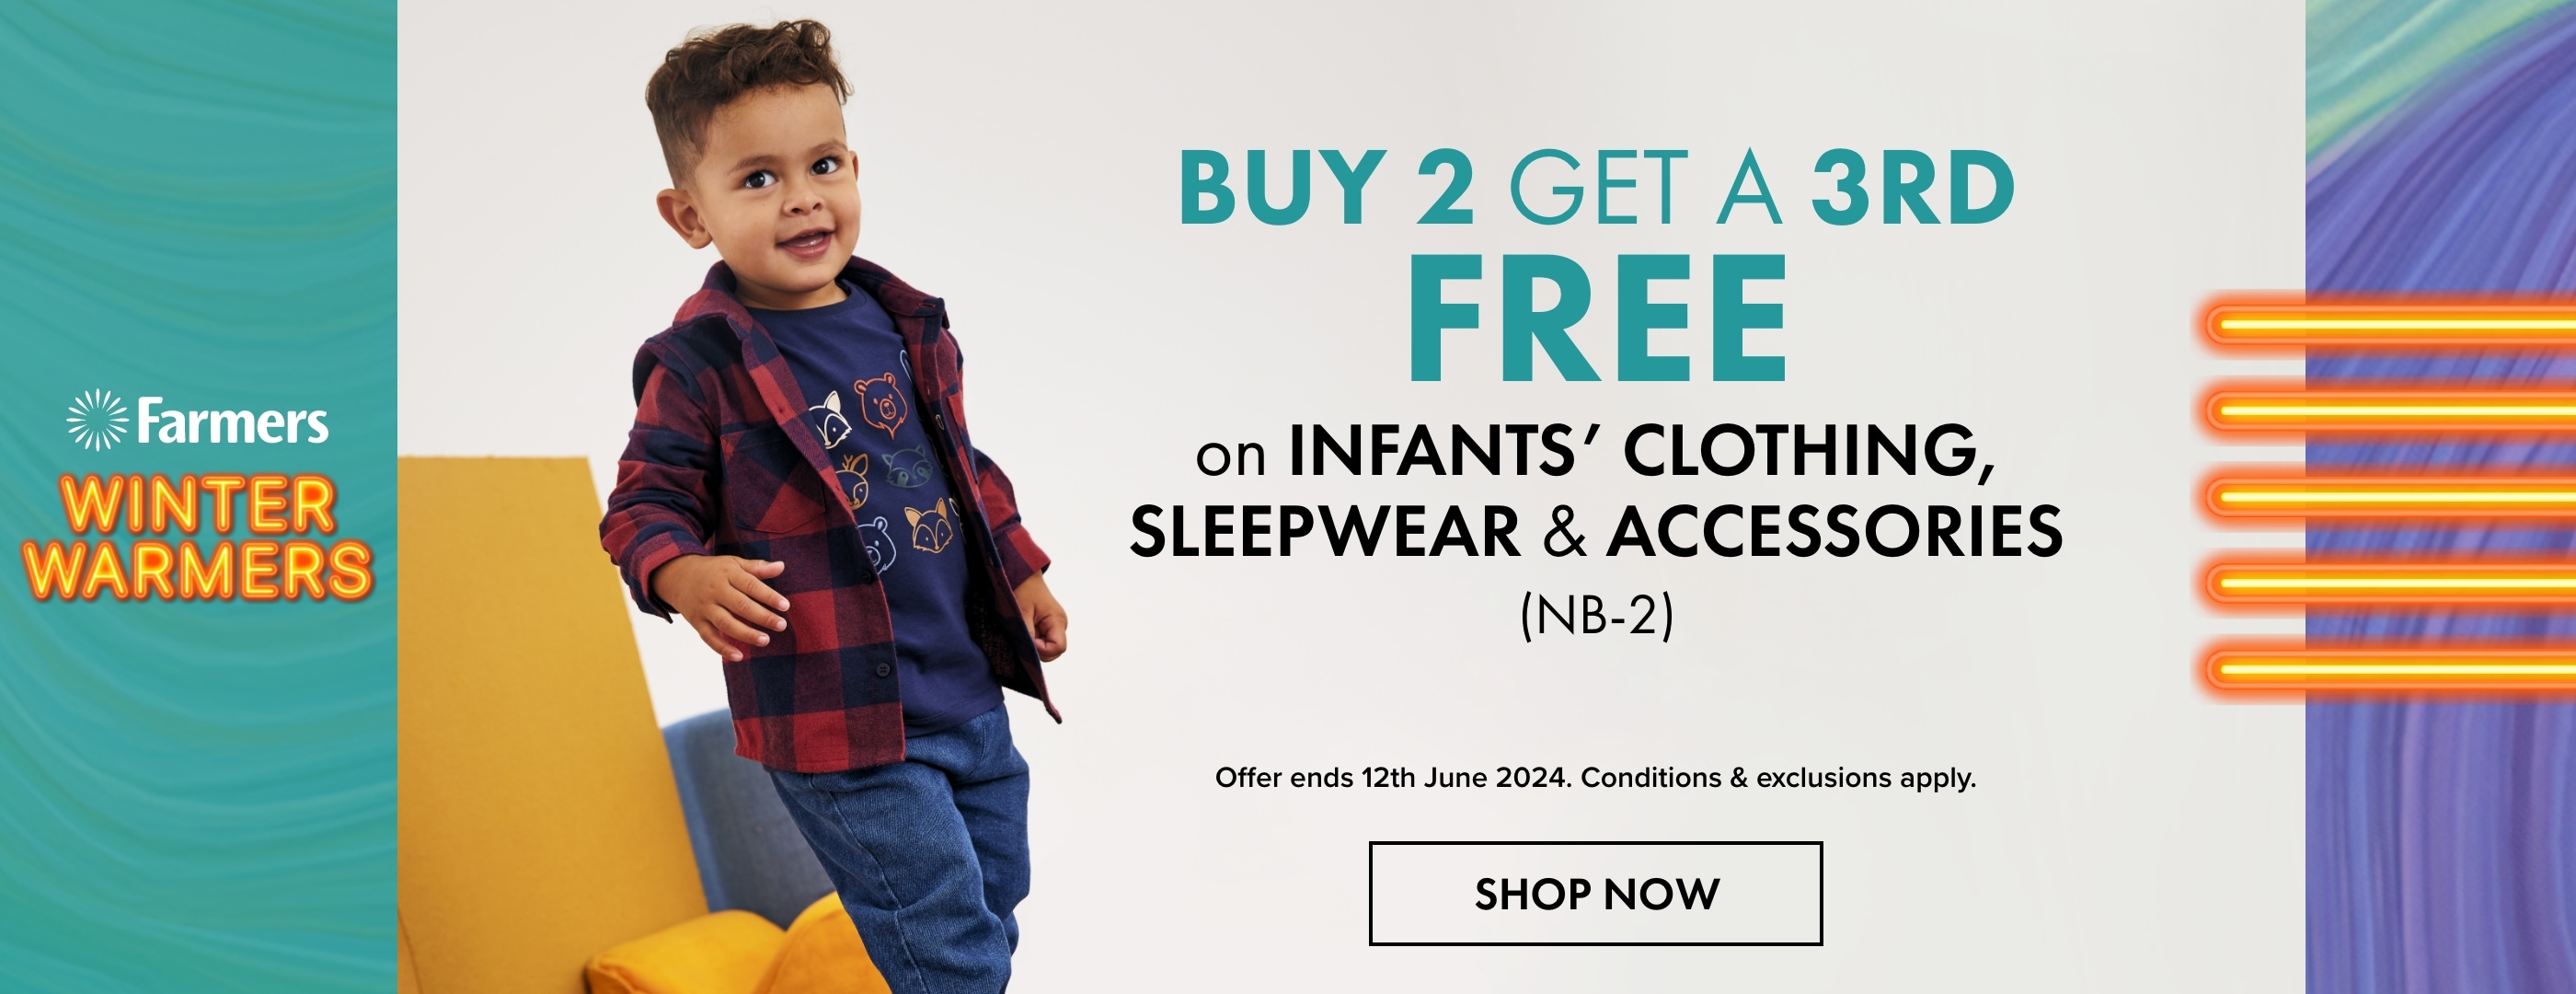 BUY 2  GET A 3rd FREE on Infants' Clothing, Sleepwear & Accessories Sizes NB - 2